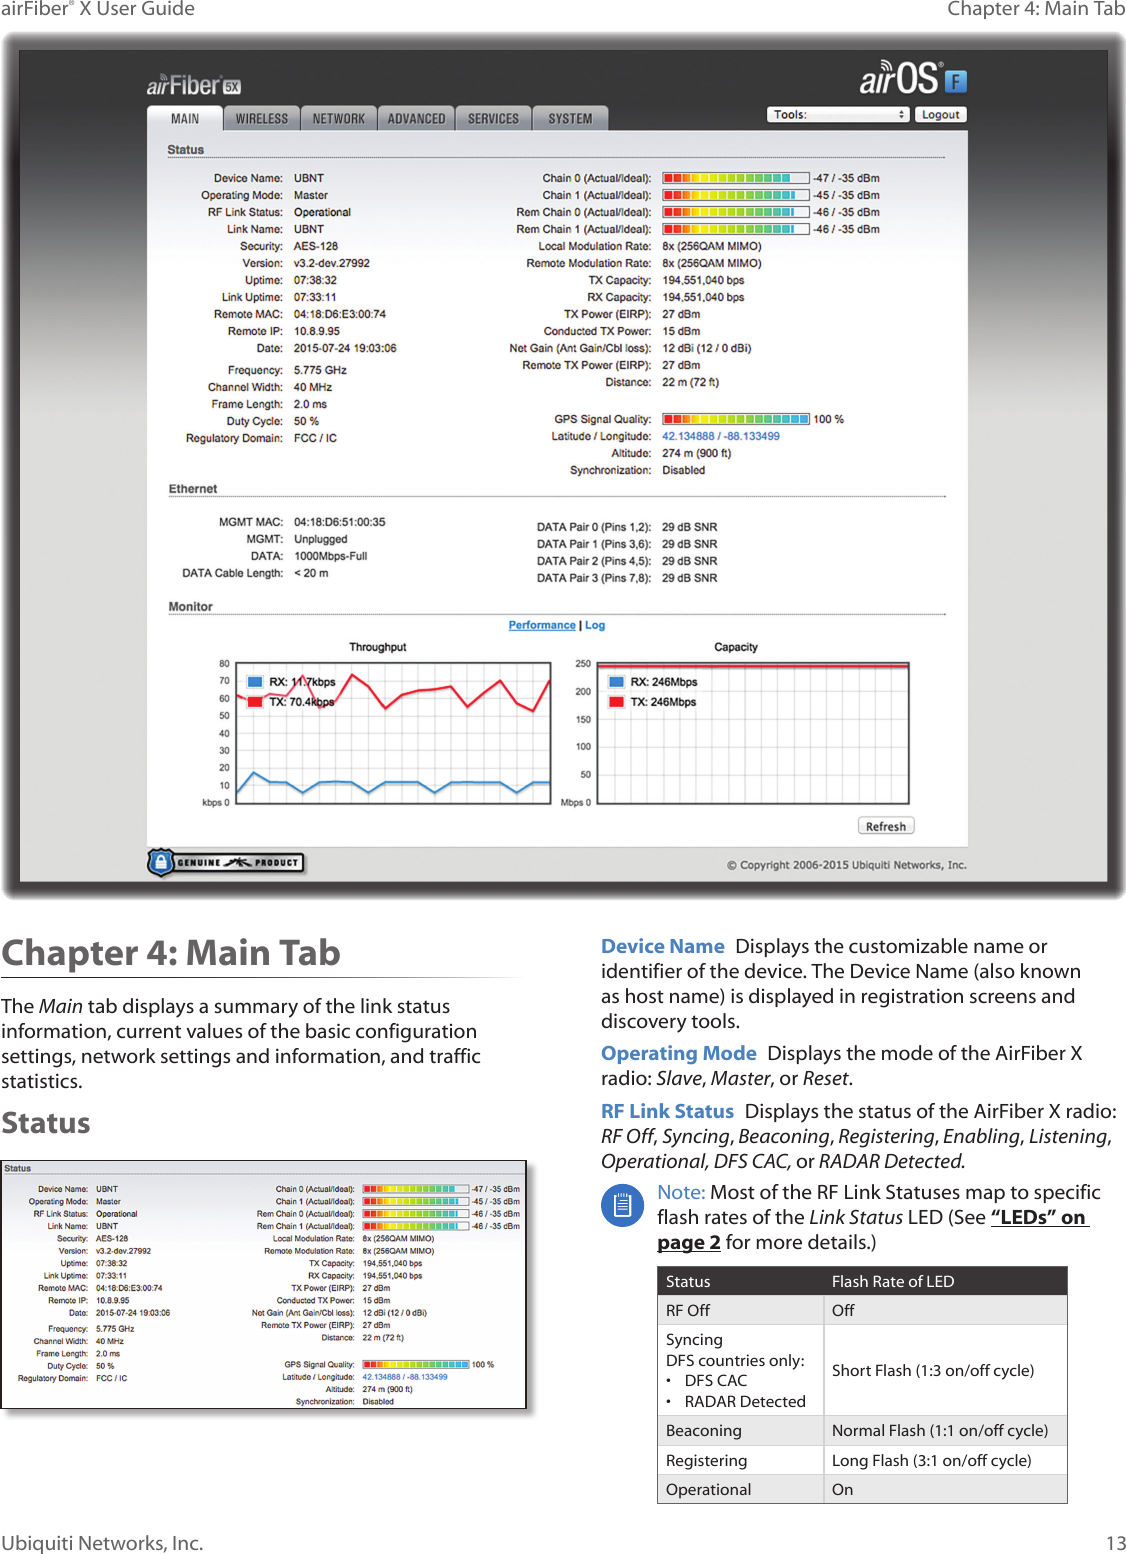 13Chapter 4: Main TabairFiber® X User GuideUbiquiti Networks, Inc.Chapter 4: Main TabThe Main tab displays a summary of the link status information, current values of the basic configuration settings, network settings and information, and traffic statistics.StatusDevice Name  Displays the customizable name or identifier of the device. The Device Name (also known as host name) is displayed in registration screens and discovery tools.Operating Mode  Displays the mode of the AirFiberX radio: Slave, Master, or Reset.RF Link Status  Displays the status of the AirFiberX radio: RFOff, Syncing, Beaconing, Registering, Enabling, Listening, Operational, DFS CAC, or RADAR Detected.Note: Most of the RF Link Statuses map to specific flash rates of the Link Status LED (See “LEDs” on page 2 for more details.)Status Flash Rate of LEDRF Off OffSyncingDFS countries only:•  DFS CAC•  RADAR DetectedShort Flash (1:3 on/off cycle)Beaconing Normal Flash (1:1 on/off cycle)Registering Long Flash (3:1 on/off cycle)Operational On